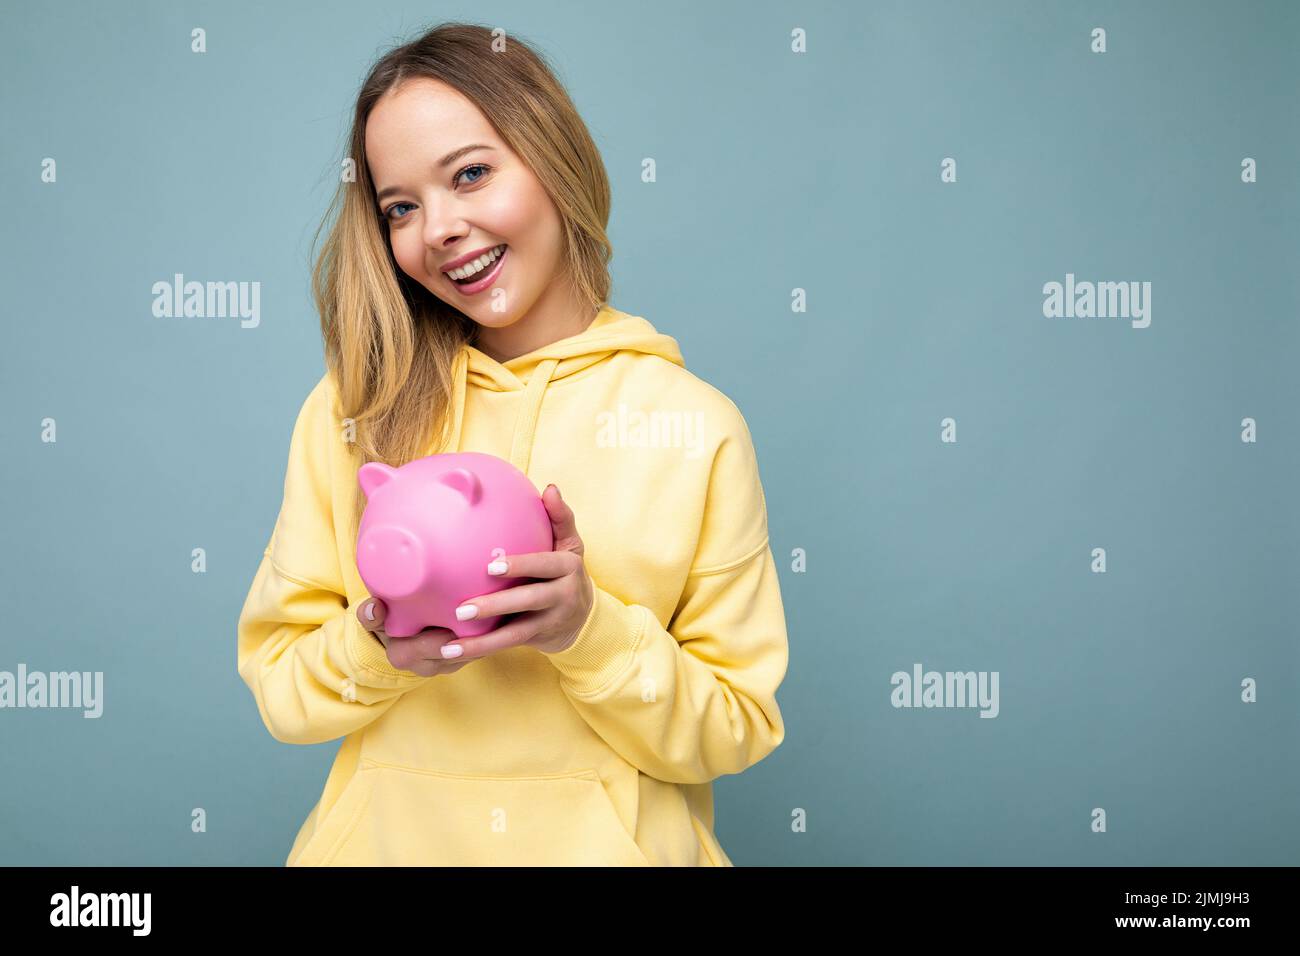 Portrait photo of happy positive smiling young beautiful attractive blonde woman with sincere emotions wearing stylish yellow ho Stock Photo